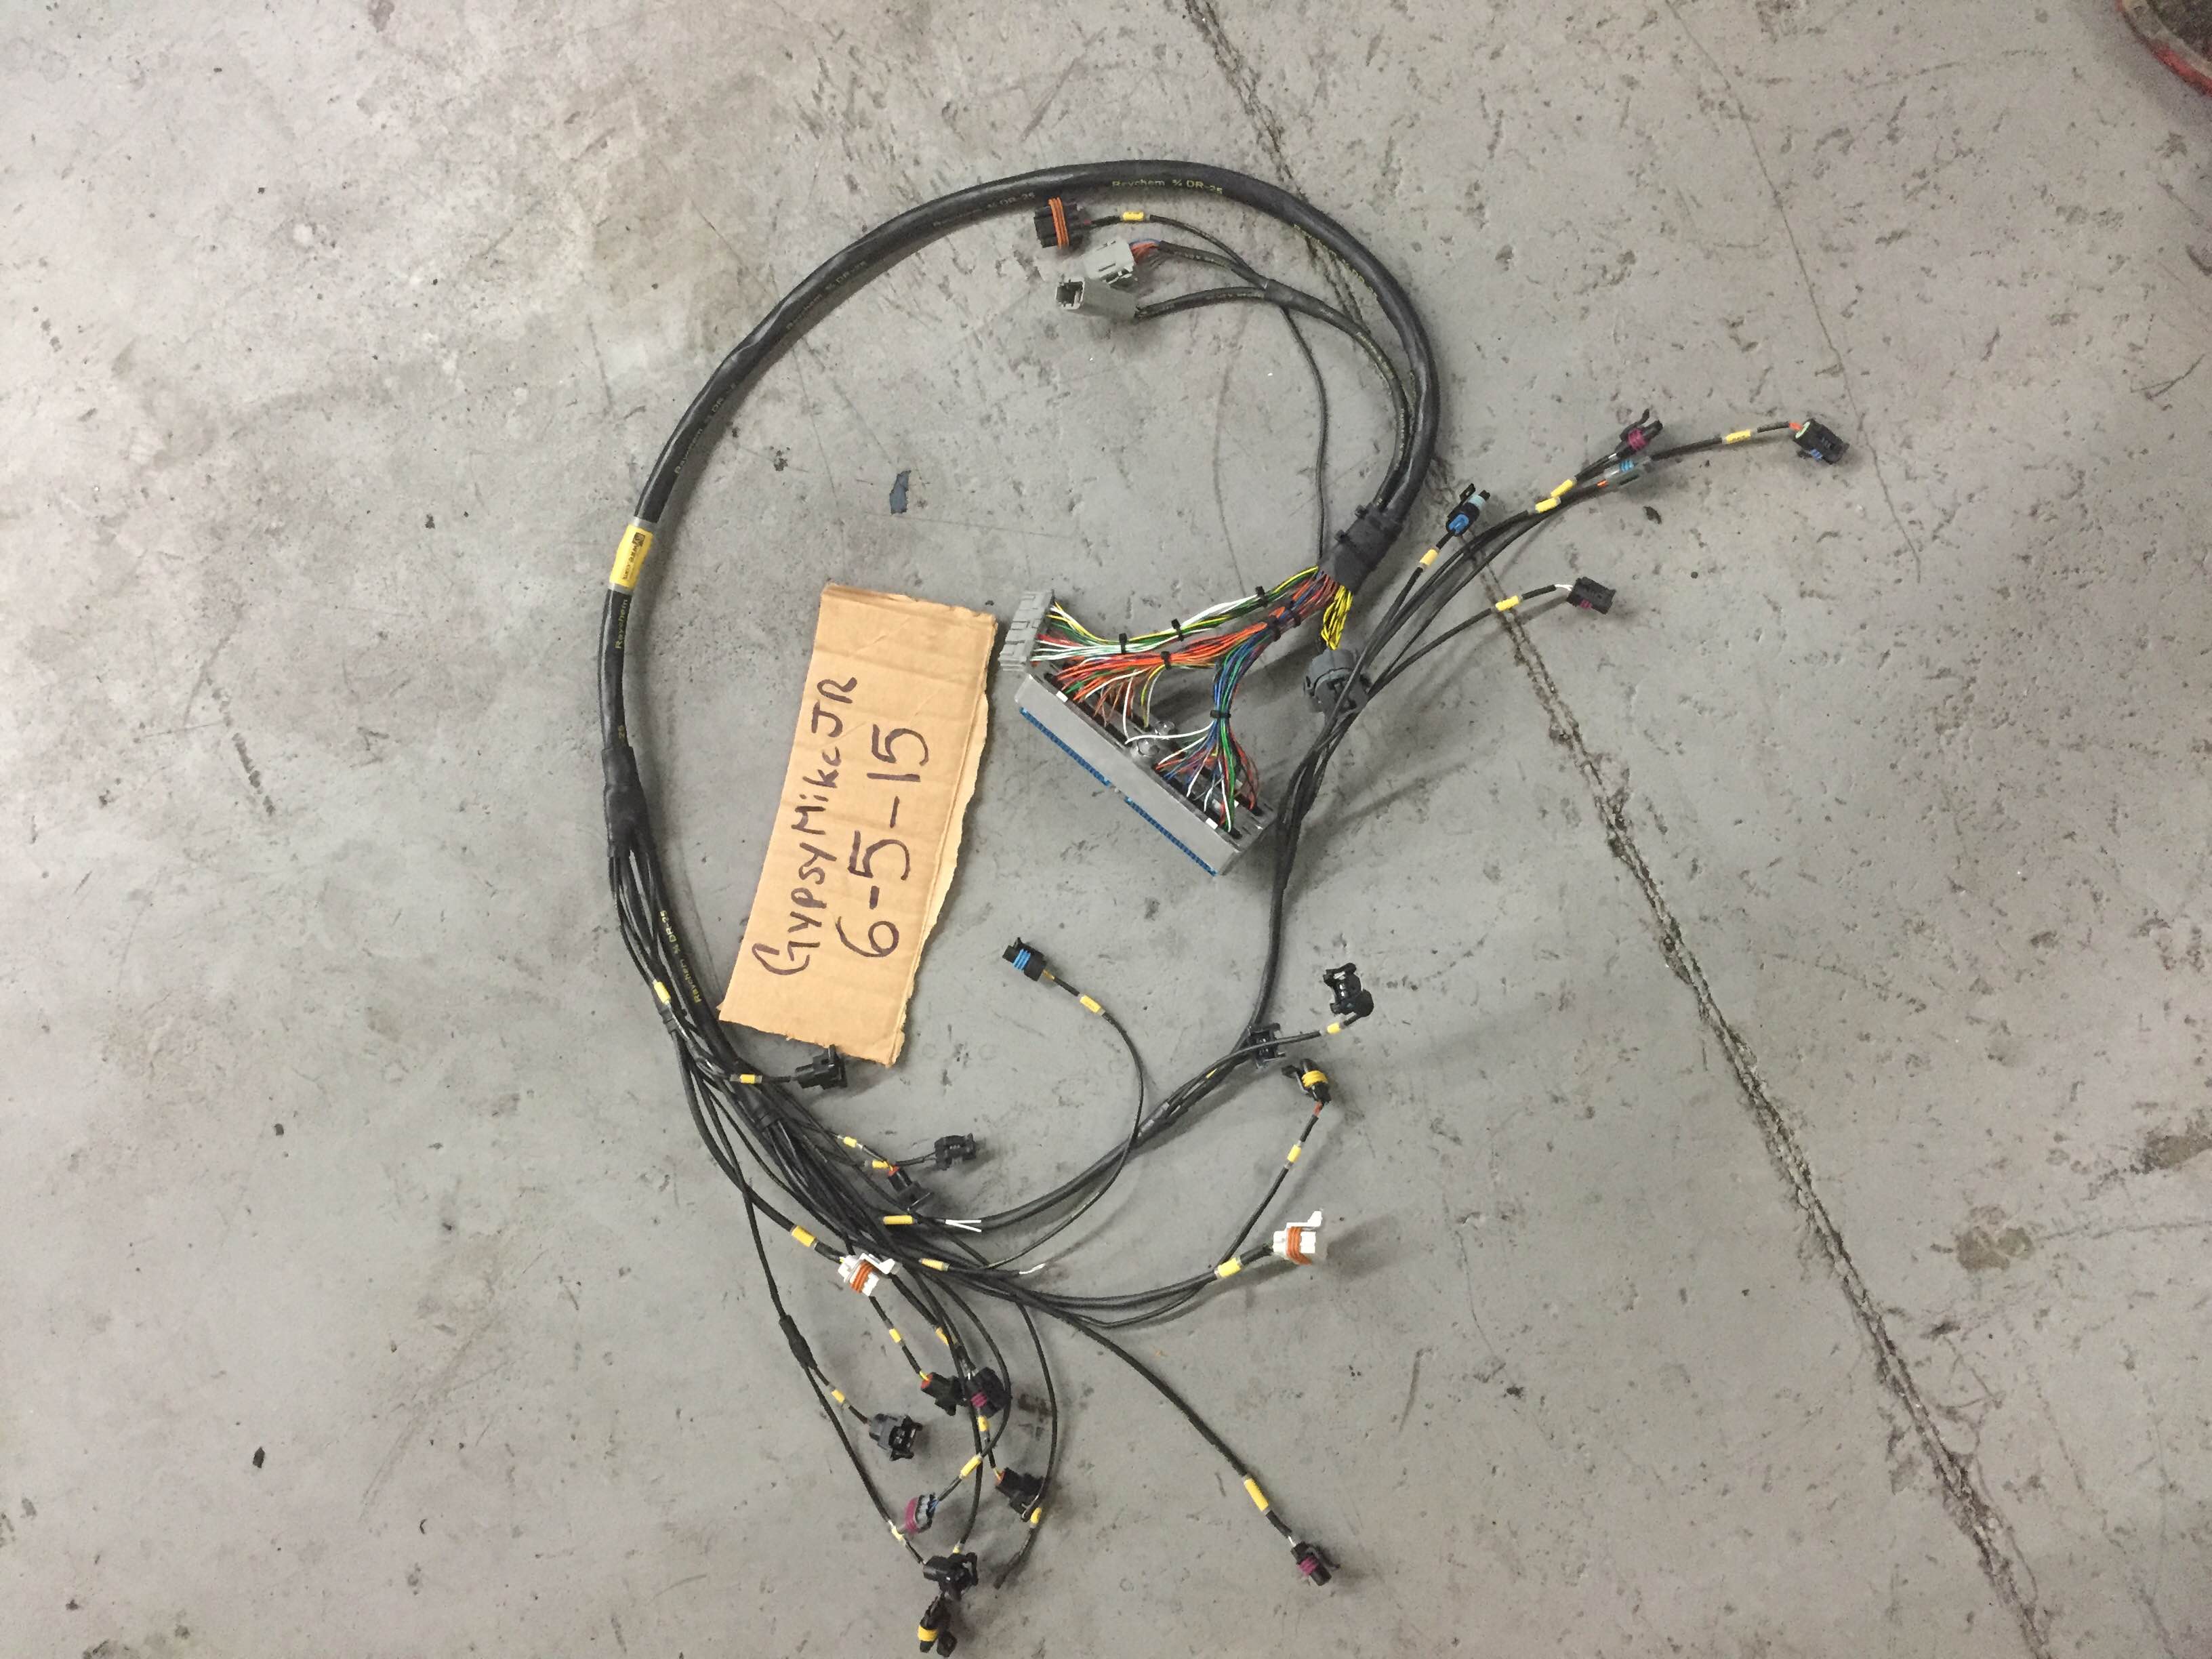 ls1 stand alone wiring harness